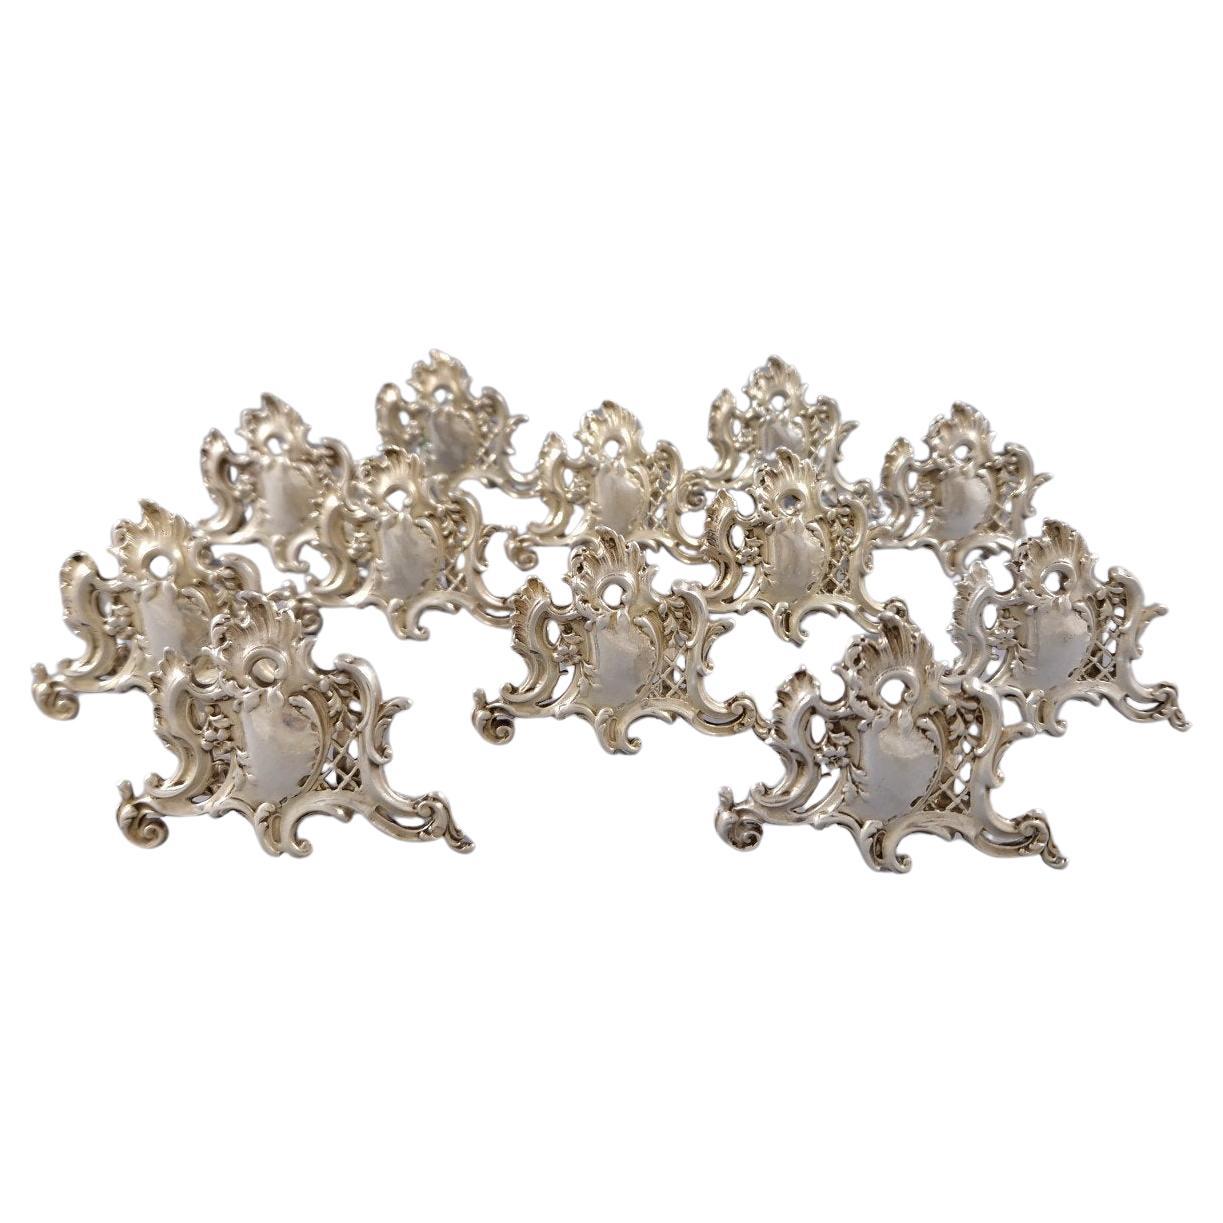 12 French Sterling Silver Place Card Holders For Sale